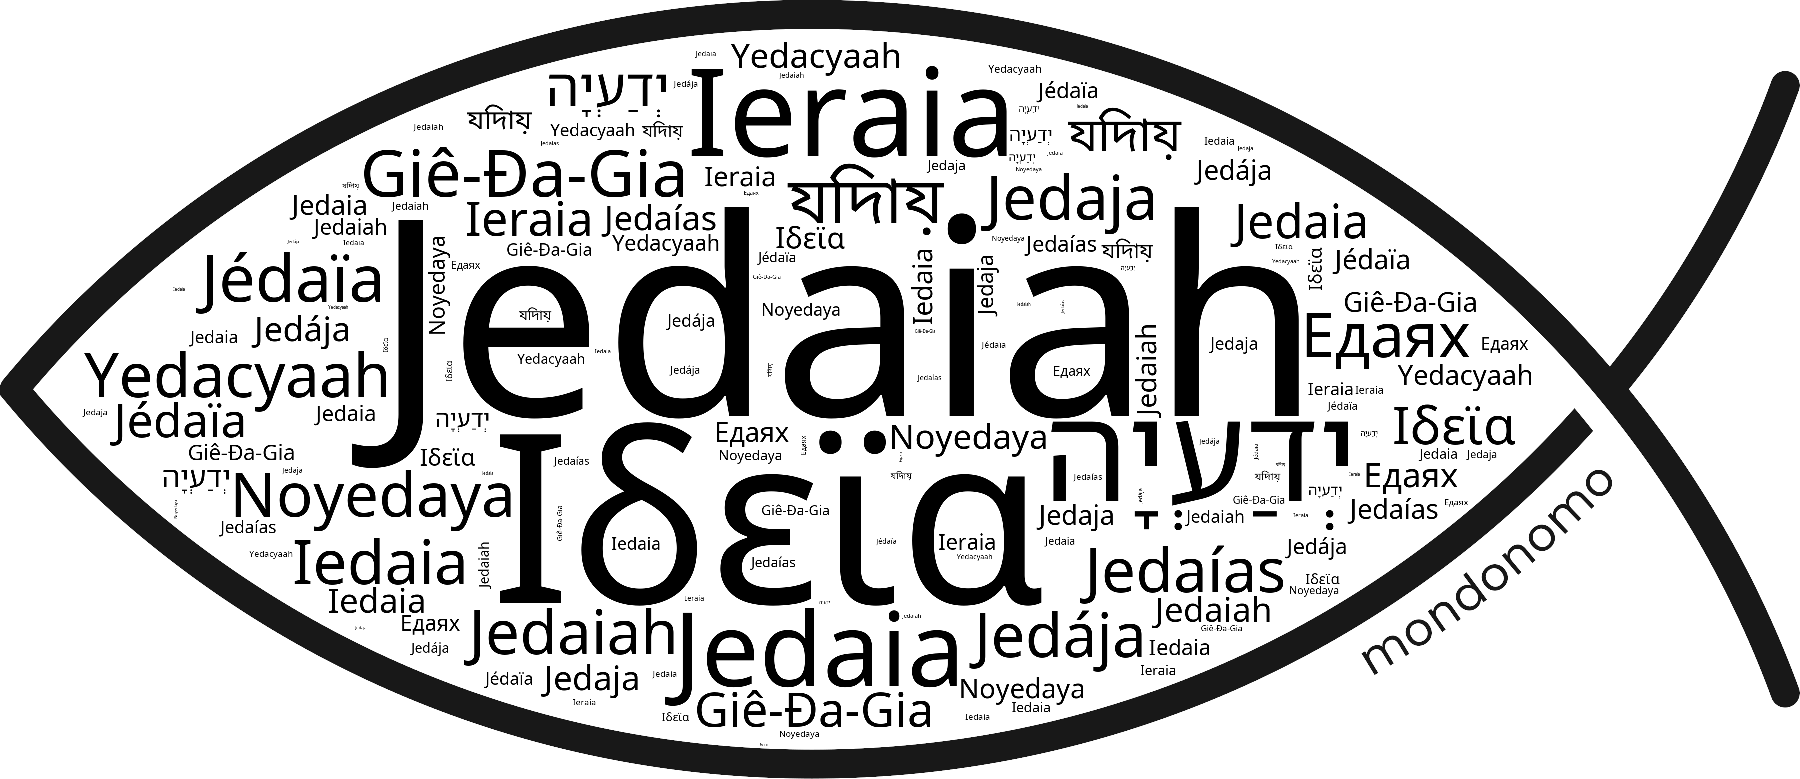 Name Jedaiah in the world's Bibles